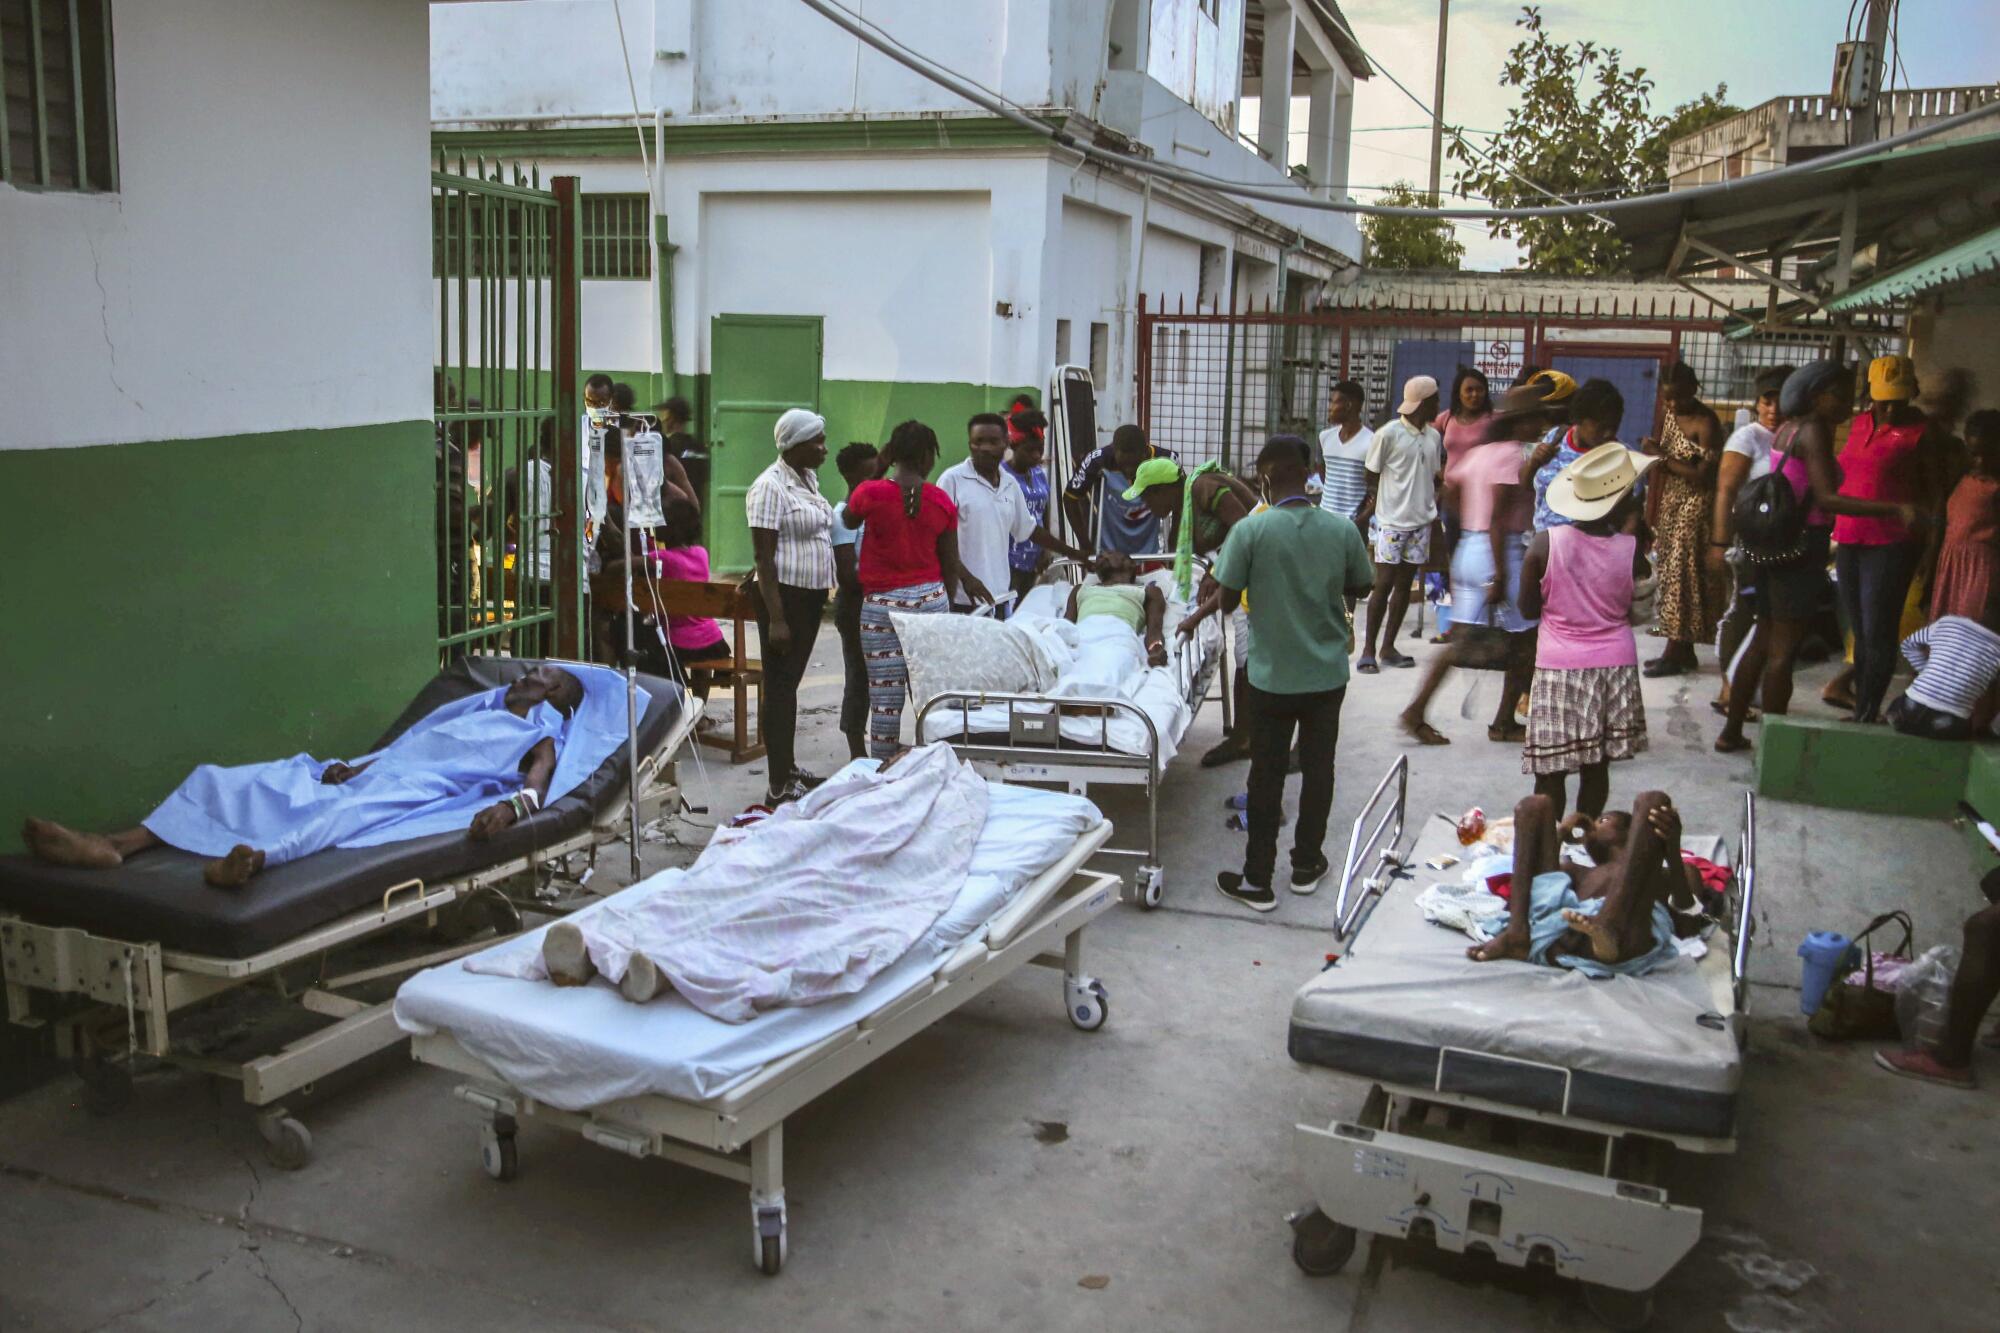 People injured during the earthquake are treated in the hospital while lying in beds.